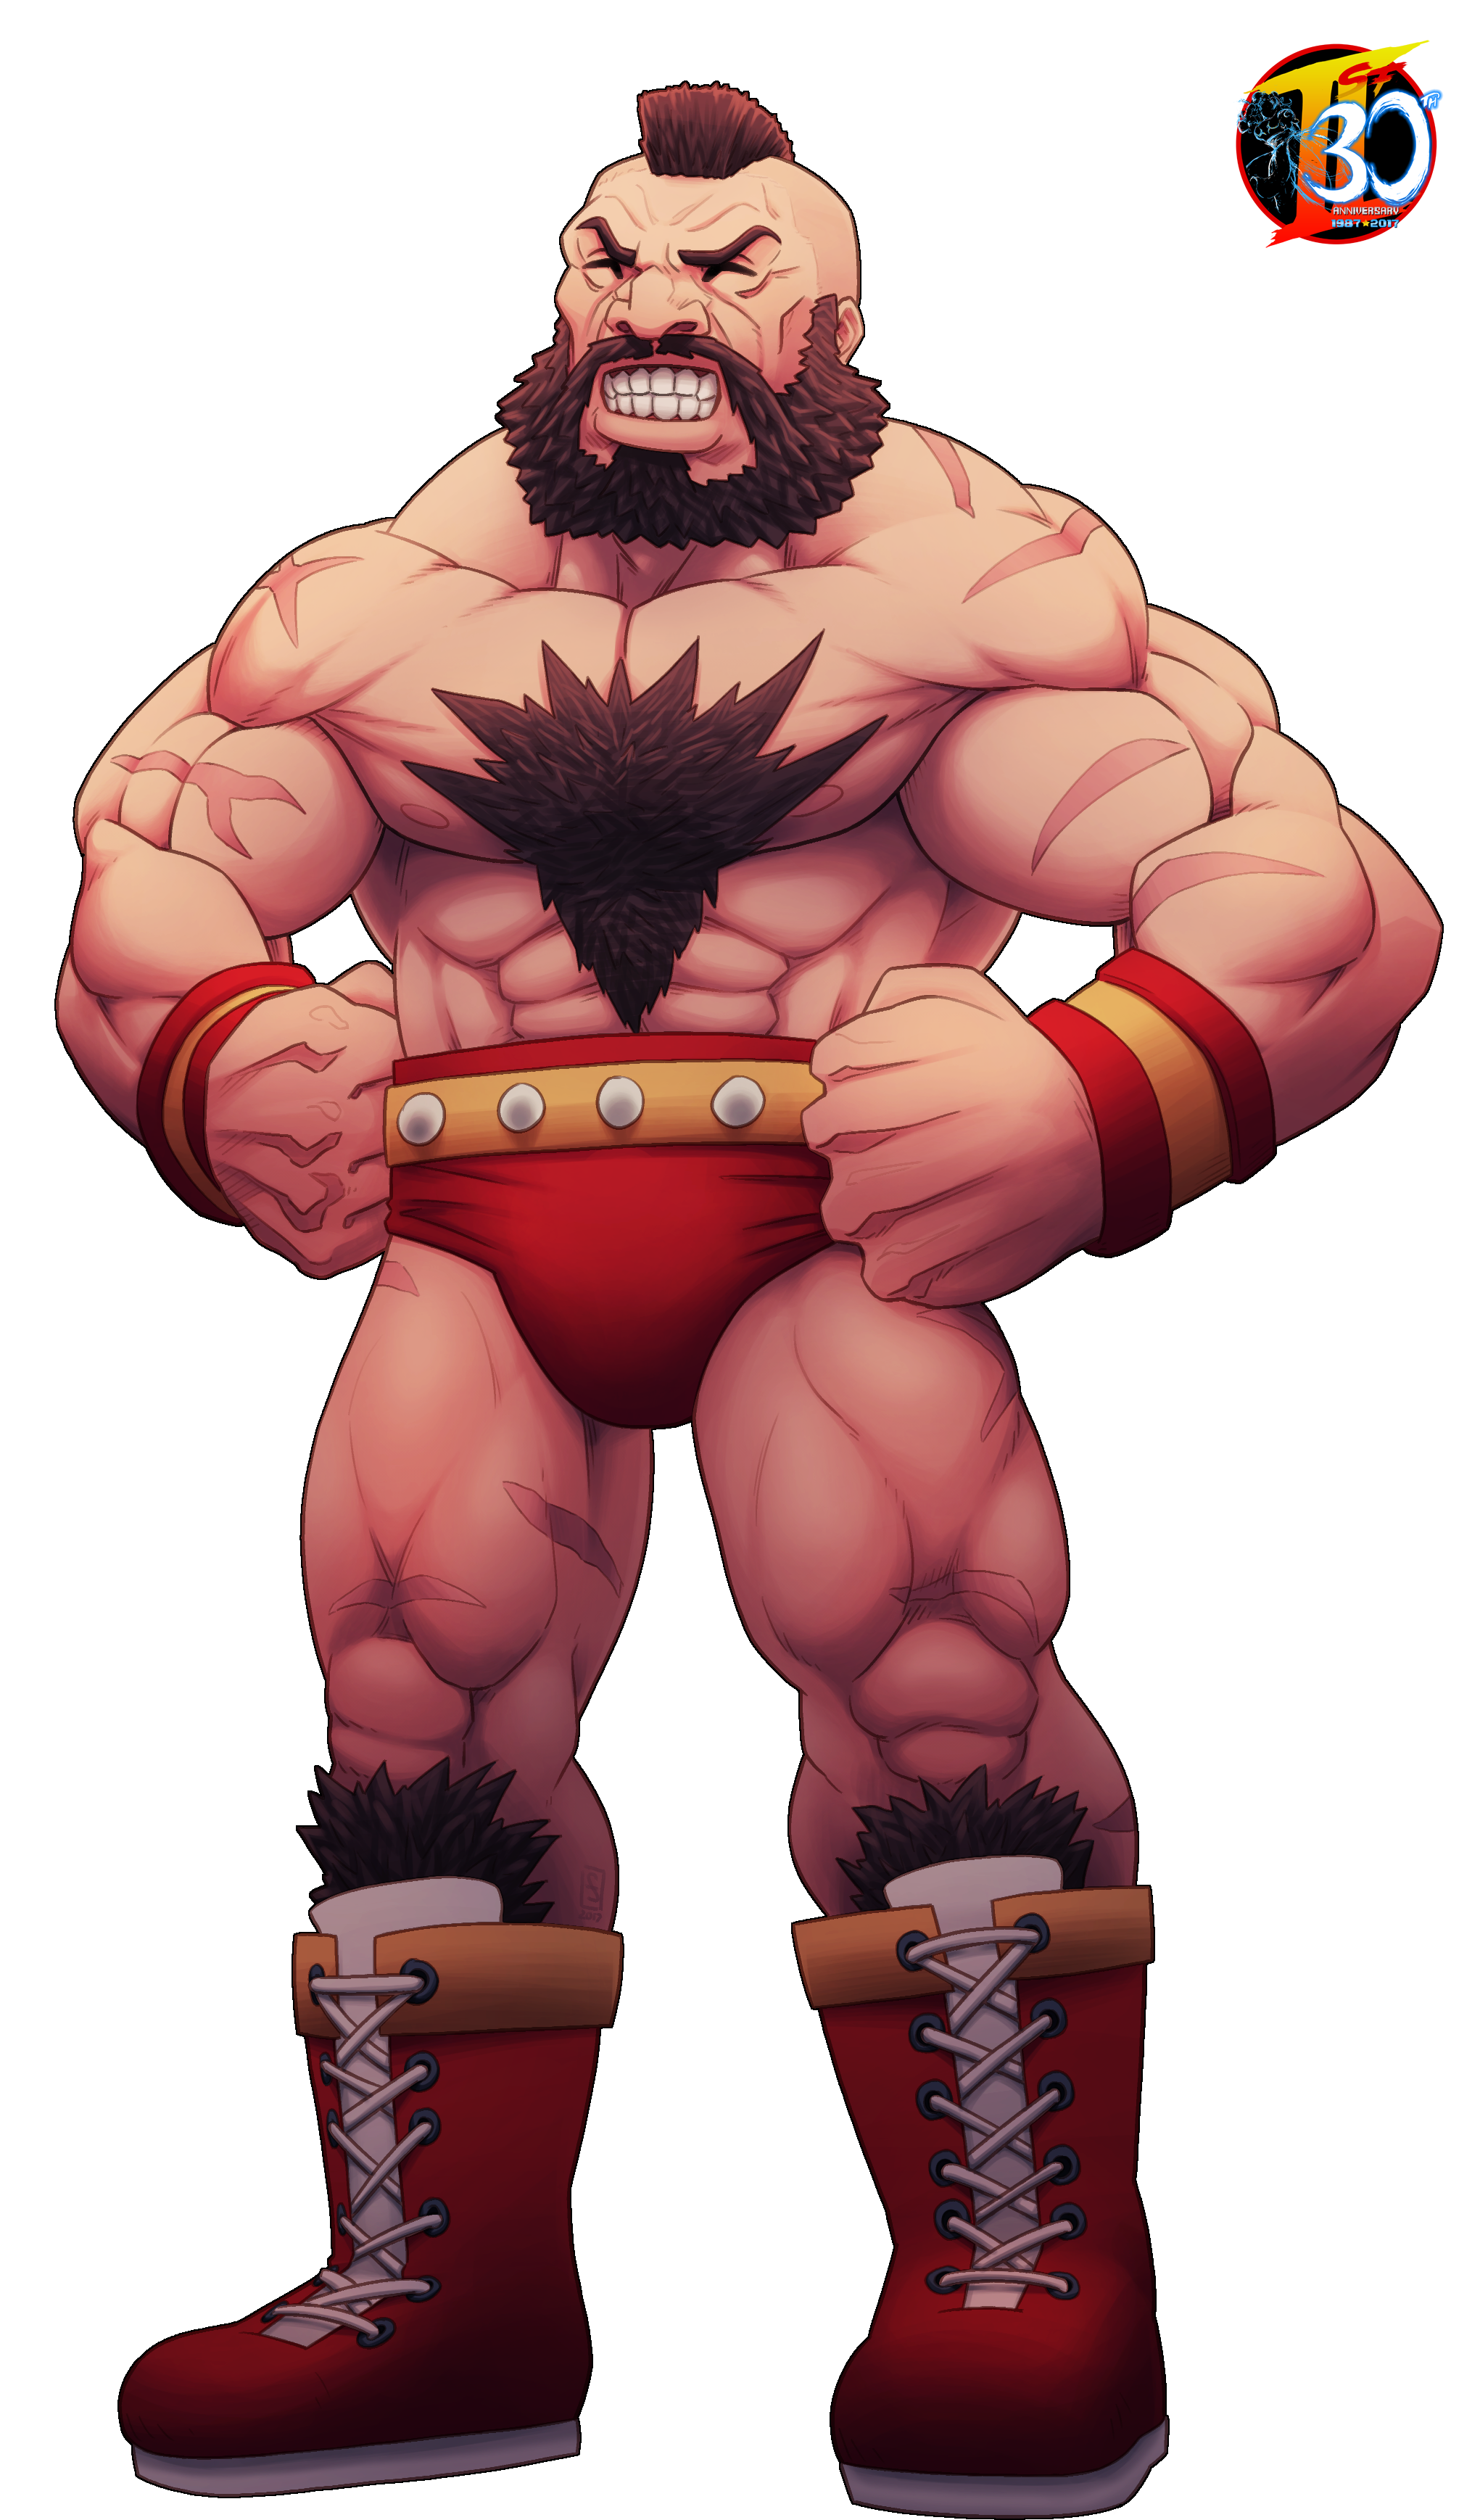 Is Zangief a popular character in Russia? - Quora